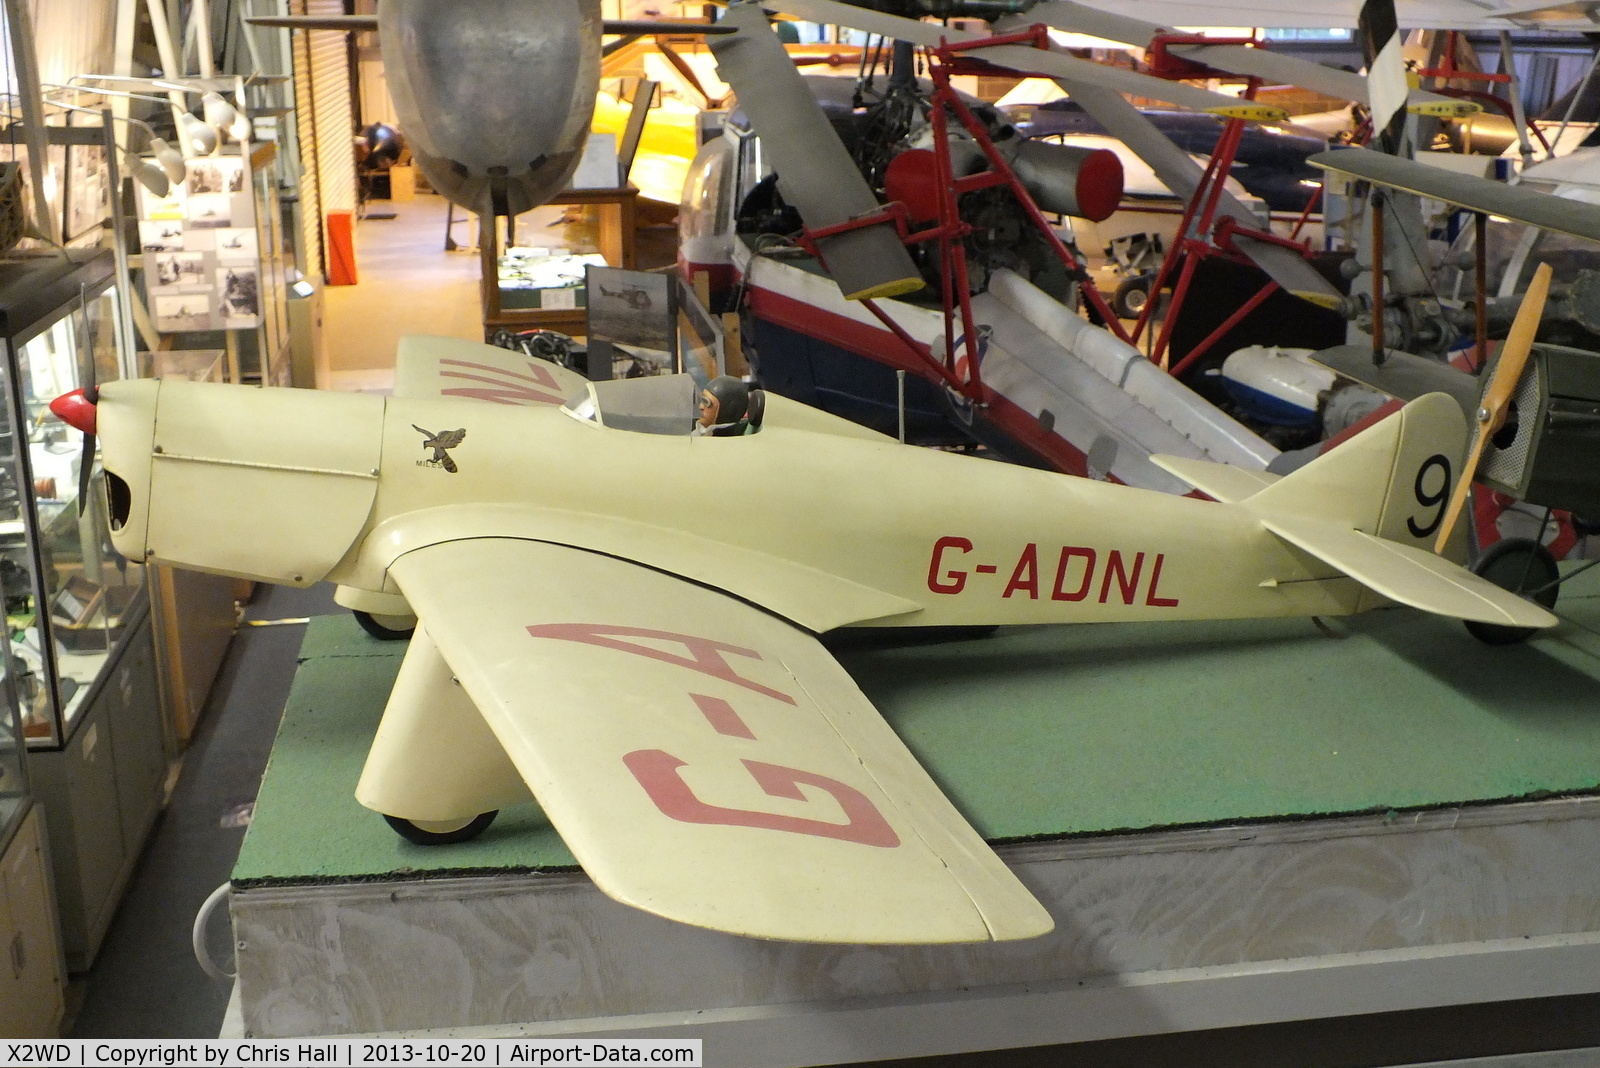 X2WD Airport - large scale model of Miles M5 Sparrowhawk G-ADNL at the Museum of Berkshire Aviation, Woodley